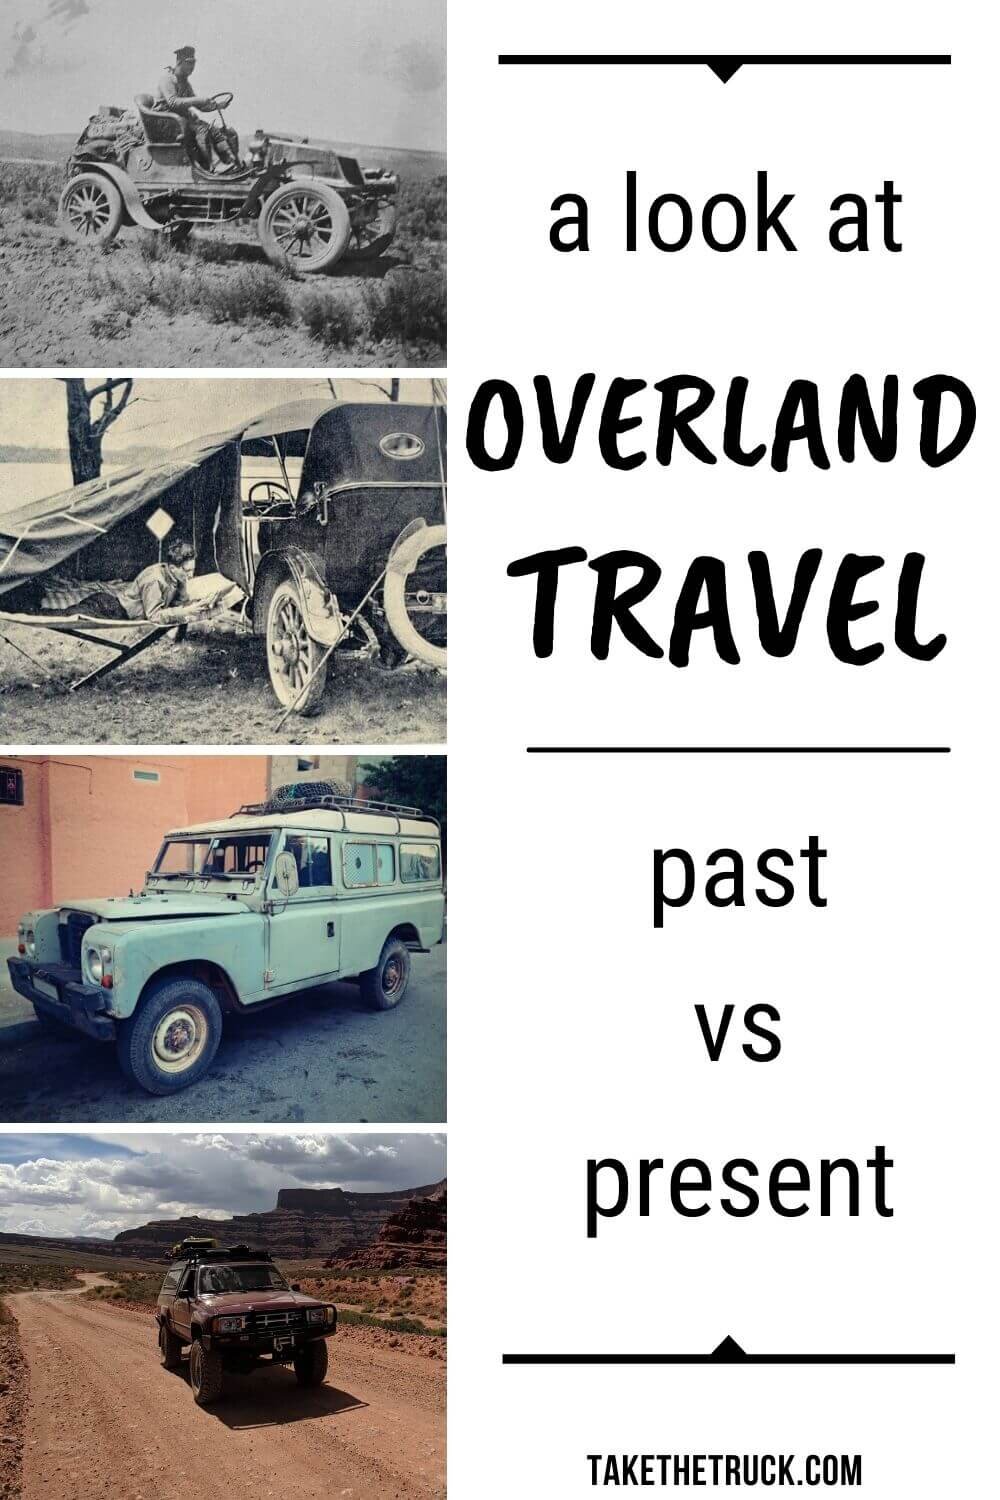 Quick and fun read about the history of overlanding and overland travel in the United States. Helps to answer the question, What is overlanding? and gives some overlanding basics for beginners.